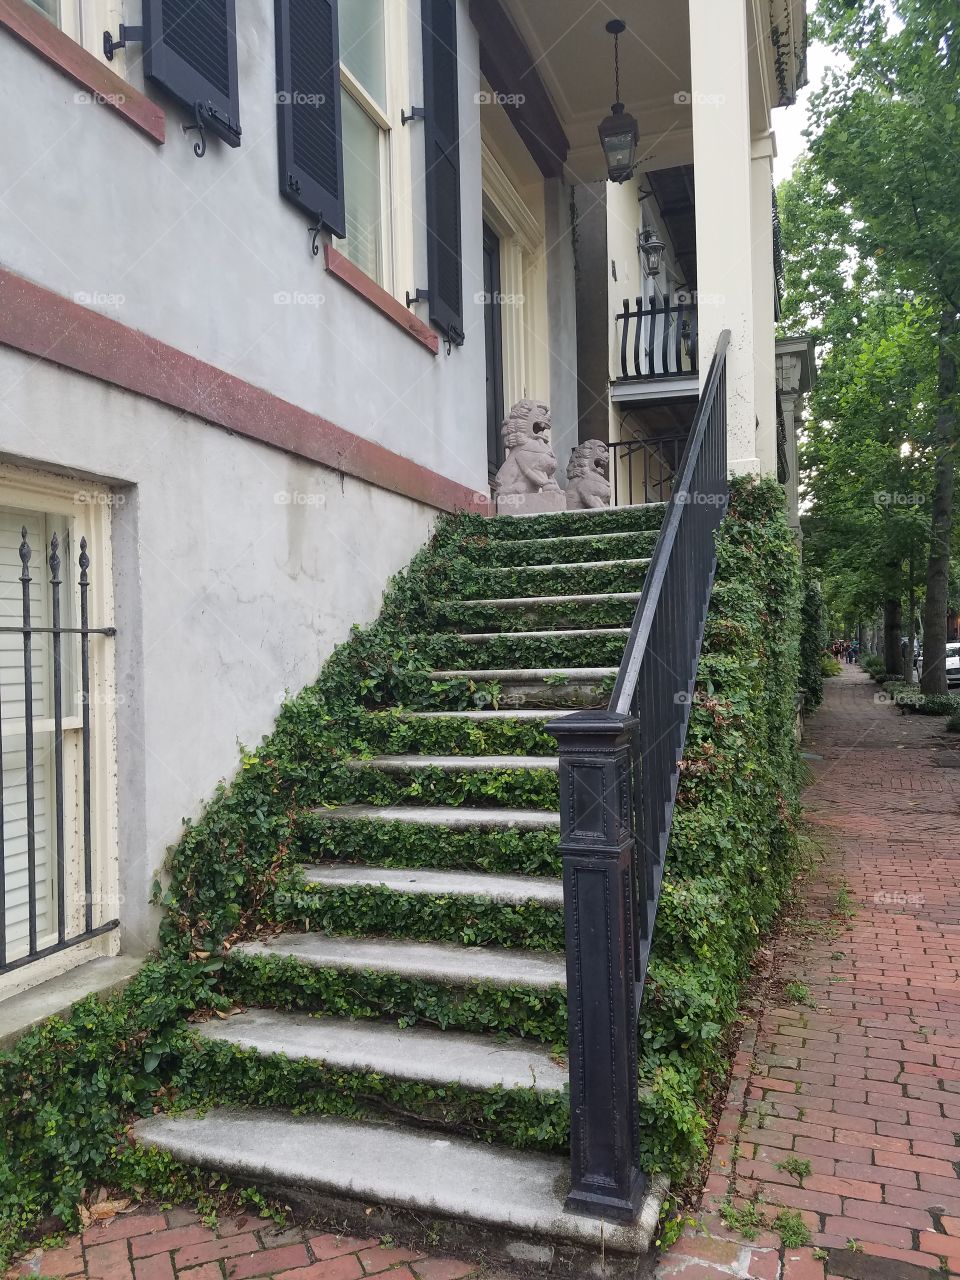 Lush green-laiden stairway with classic, iron railing lead to a beautifully historic home in Savannah.